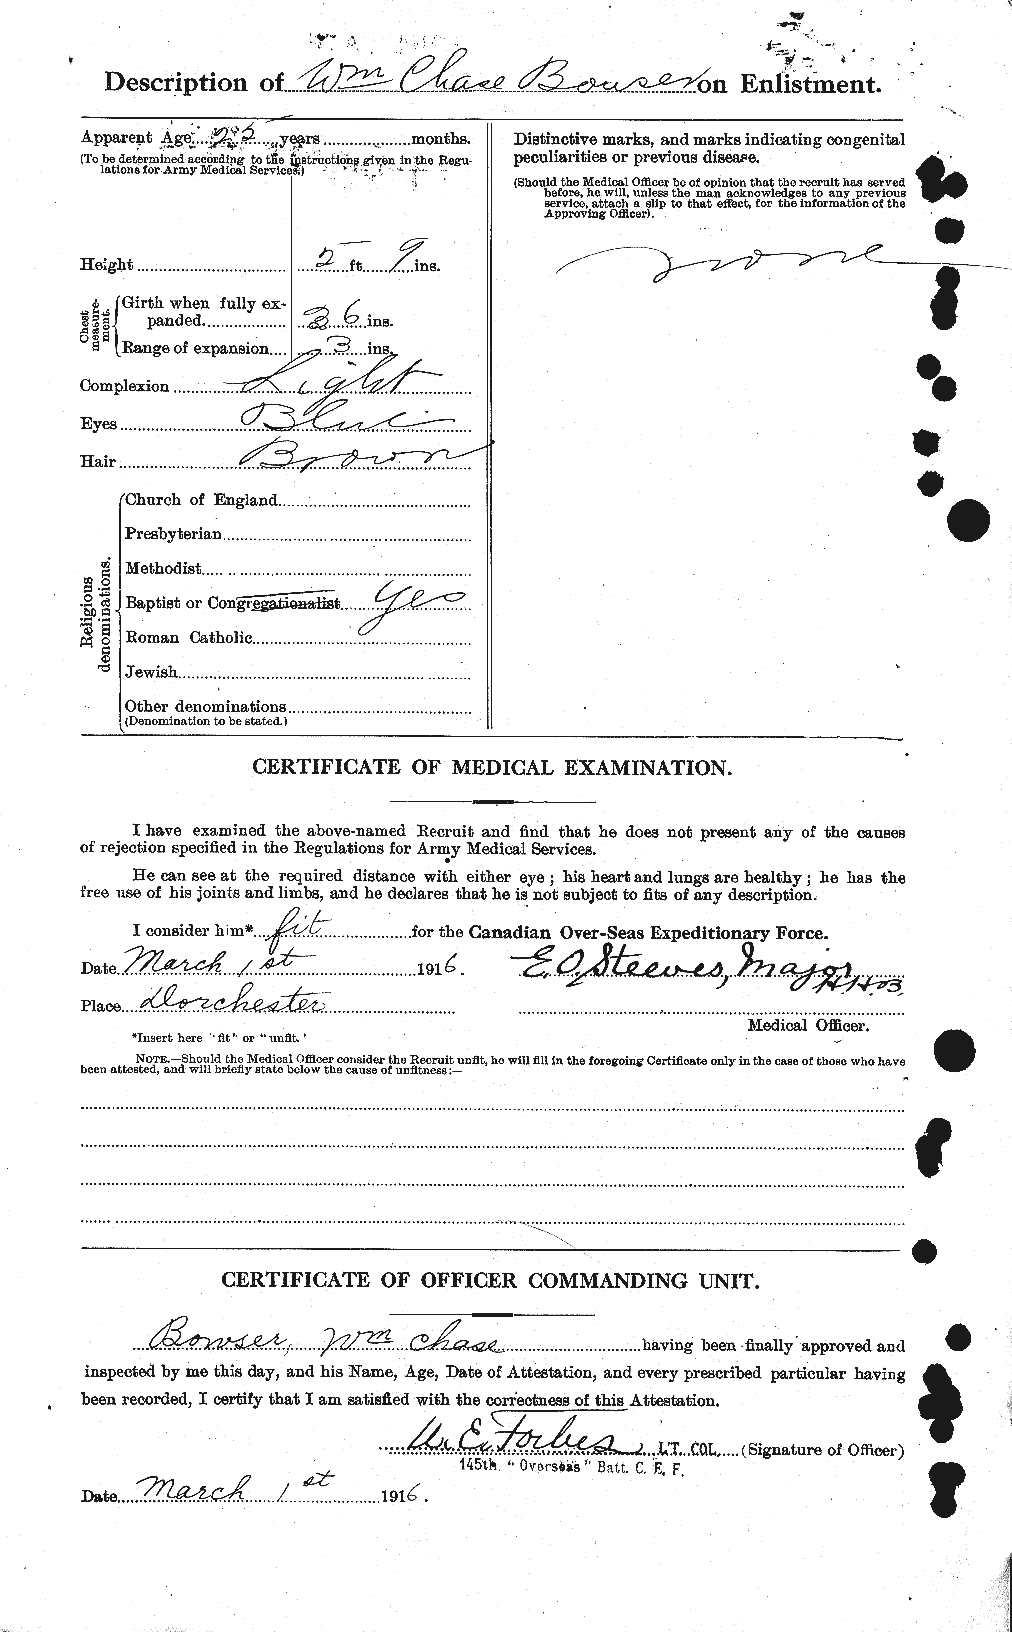 Personnel Records of the First World War - CEF 256276b